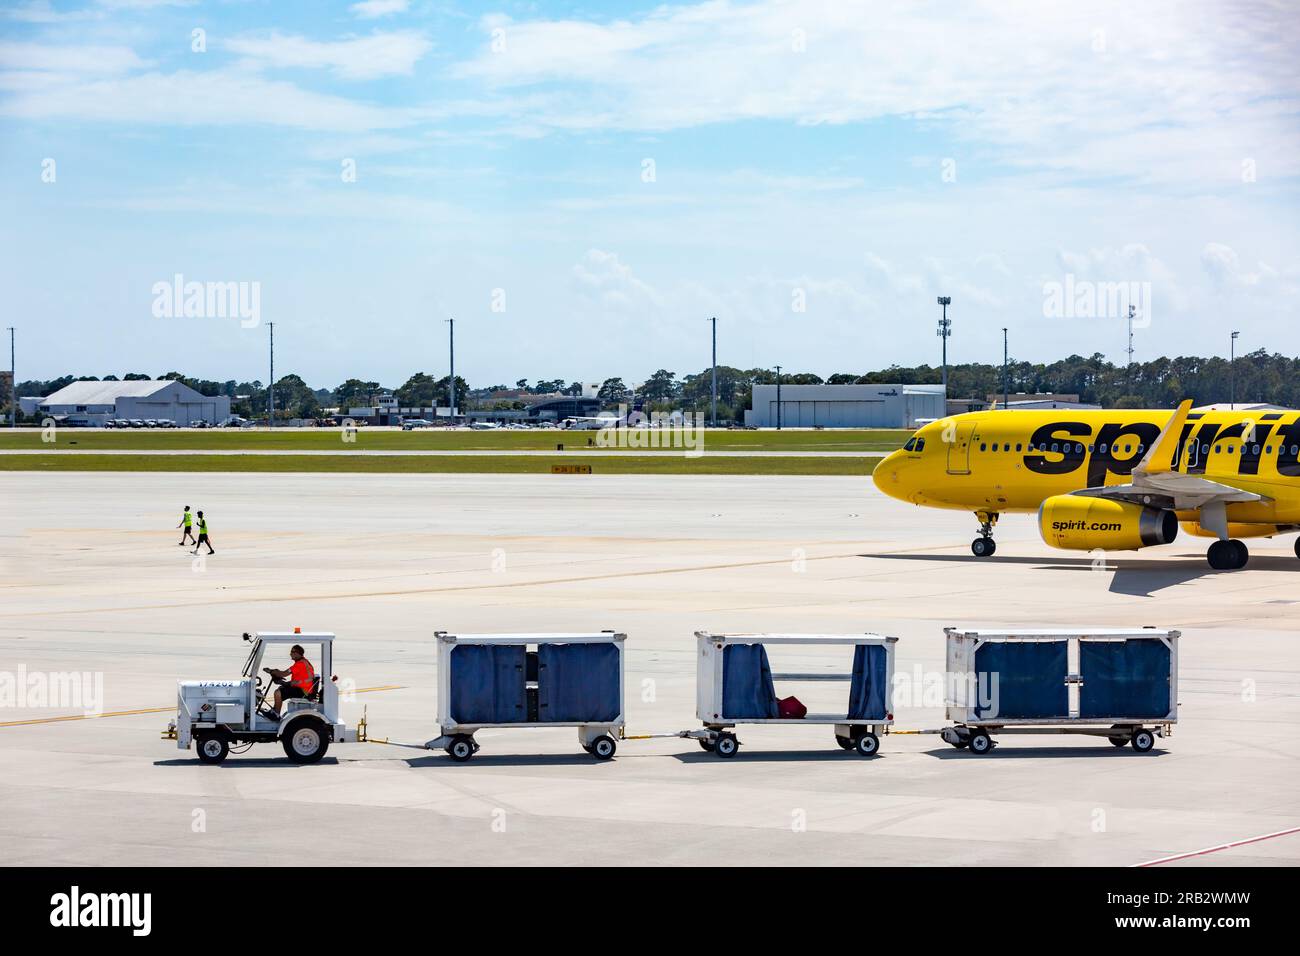 A Unifi Aviation Services tug & baggage cart pass a Spirit Airlines Airbus A320 passenger jet airliner at Myrtle Beach International Airport, SC, USA. Stock Photo